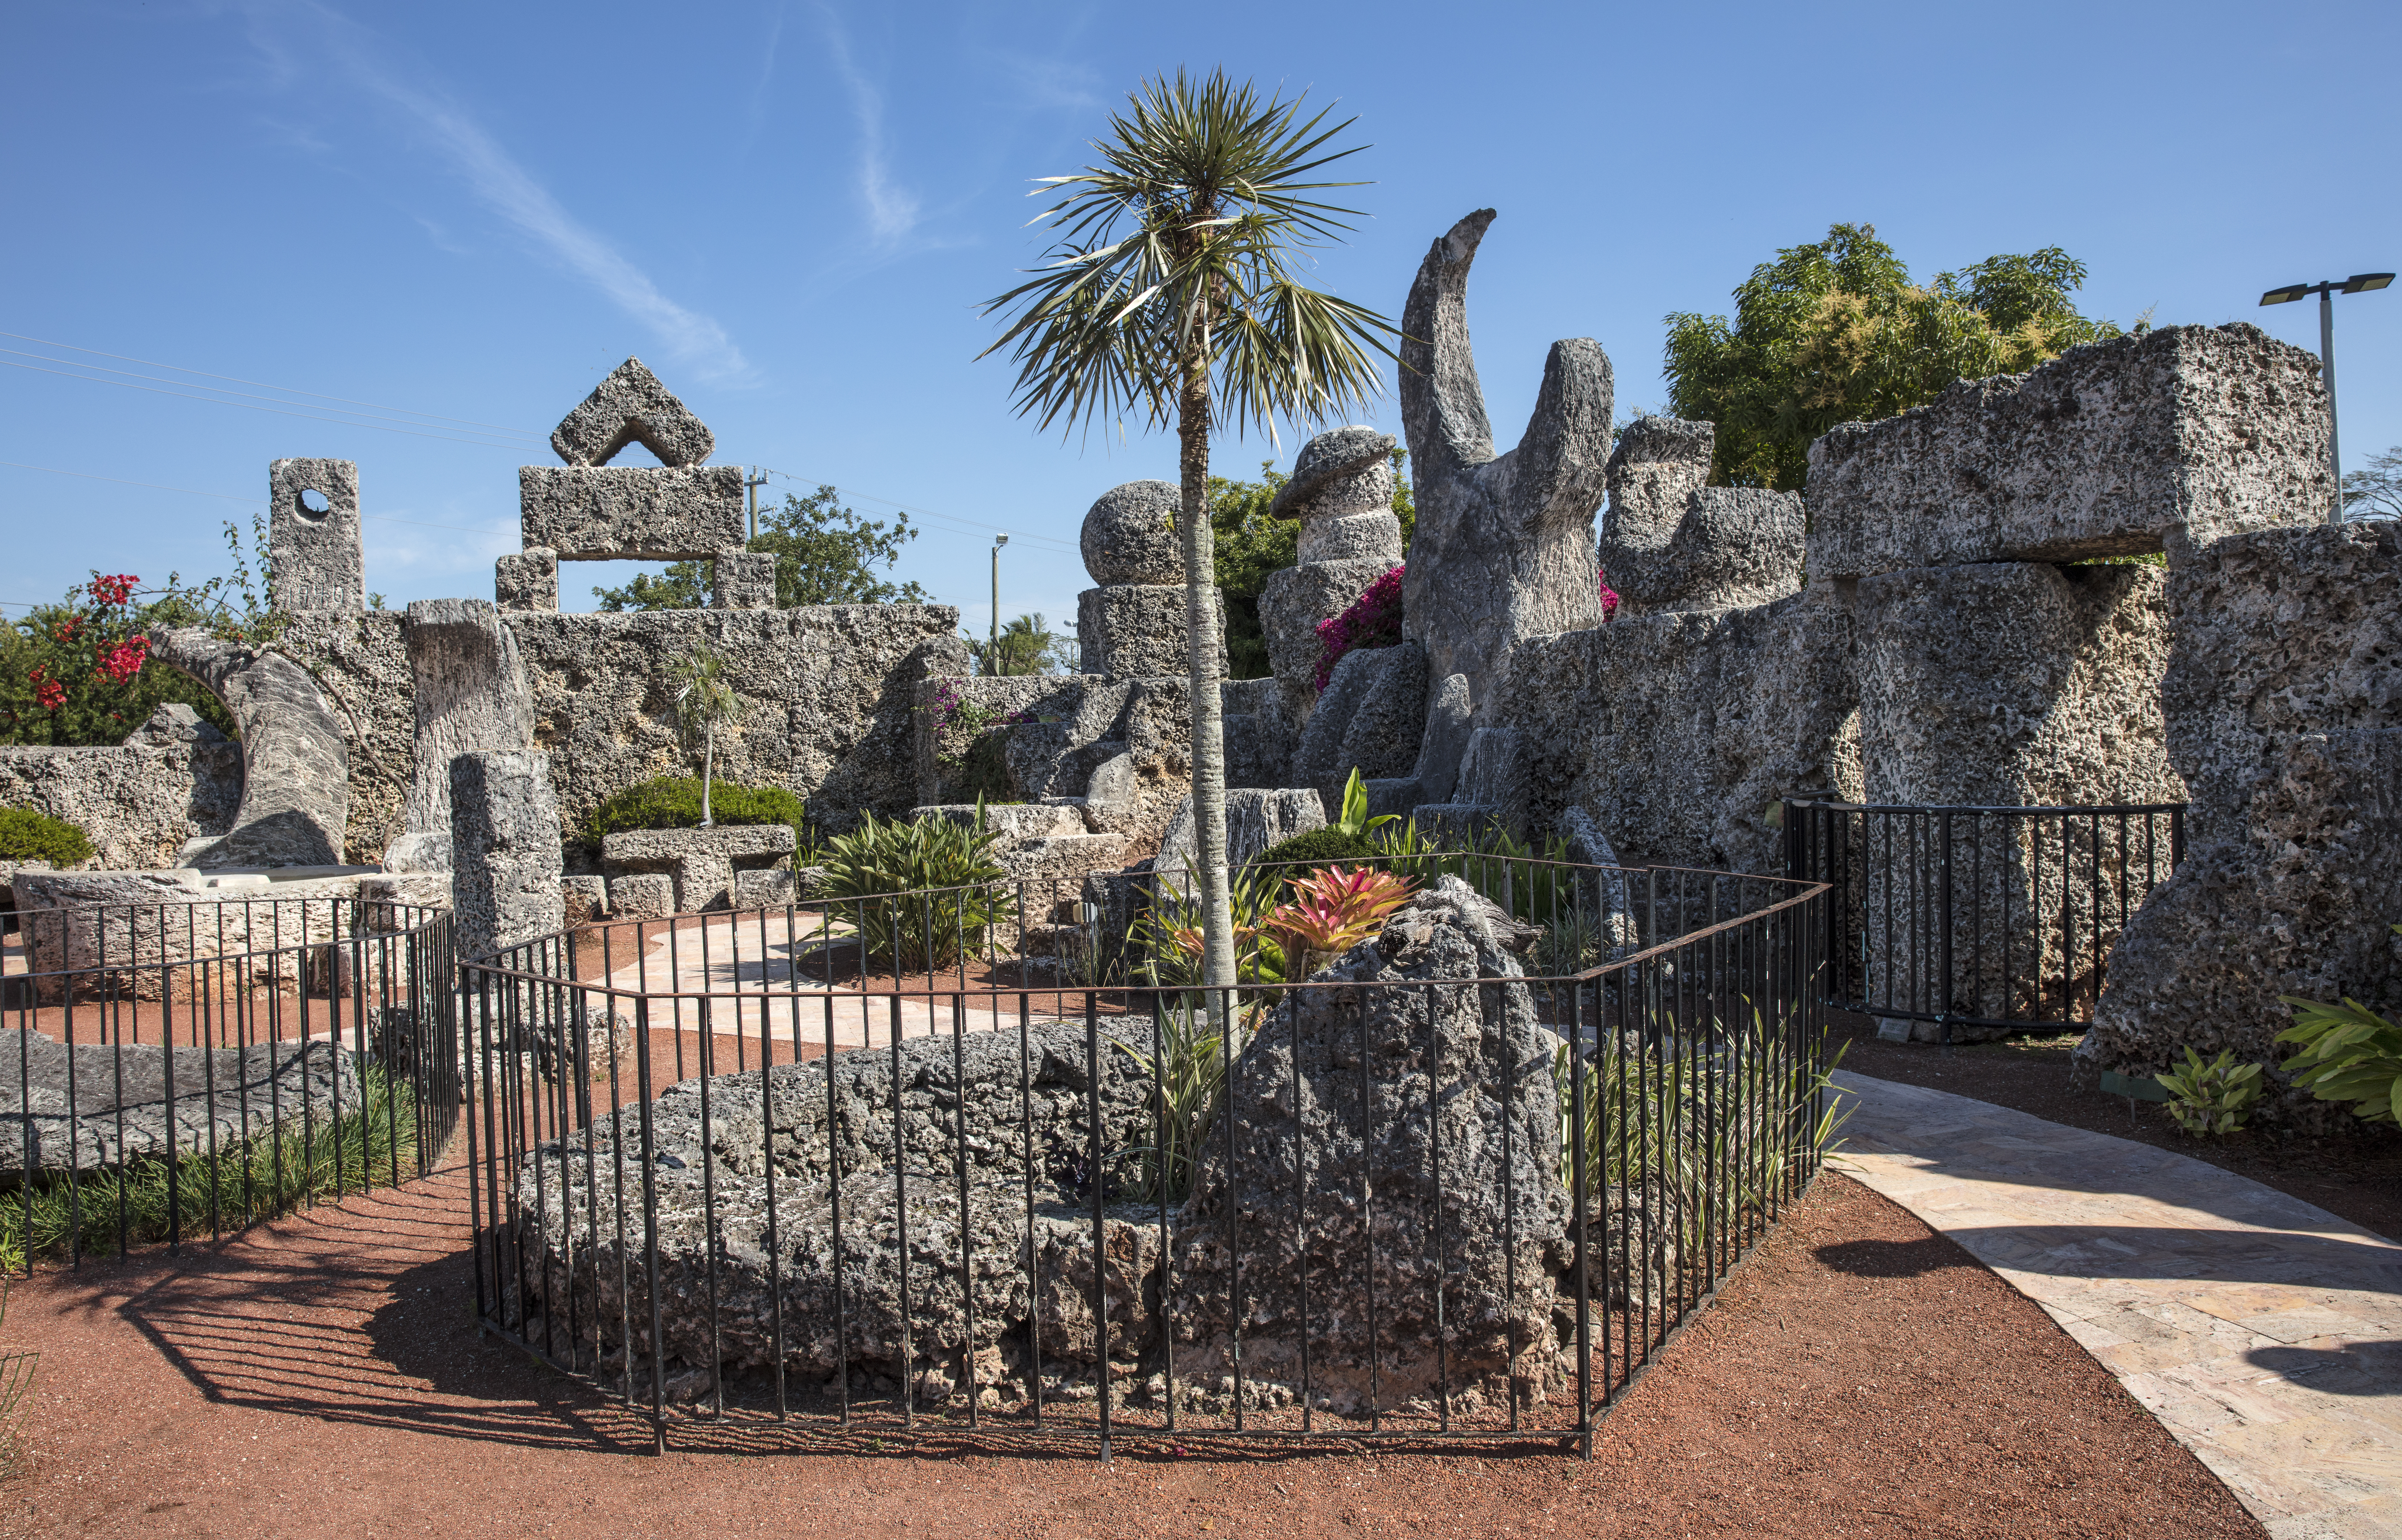 Best Destinations for a Family Vacation in Florida - Coral Castle